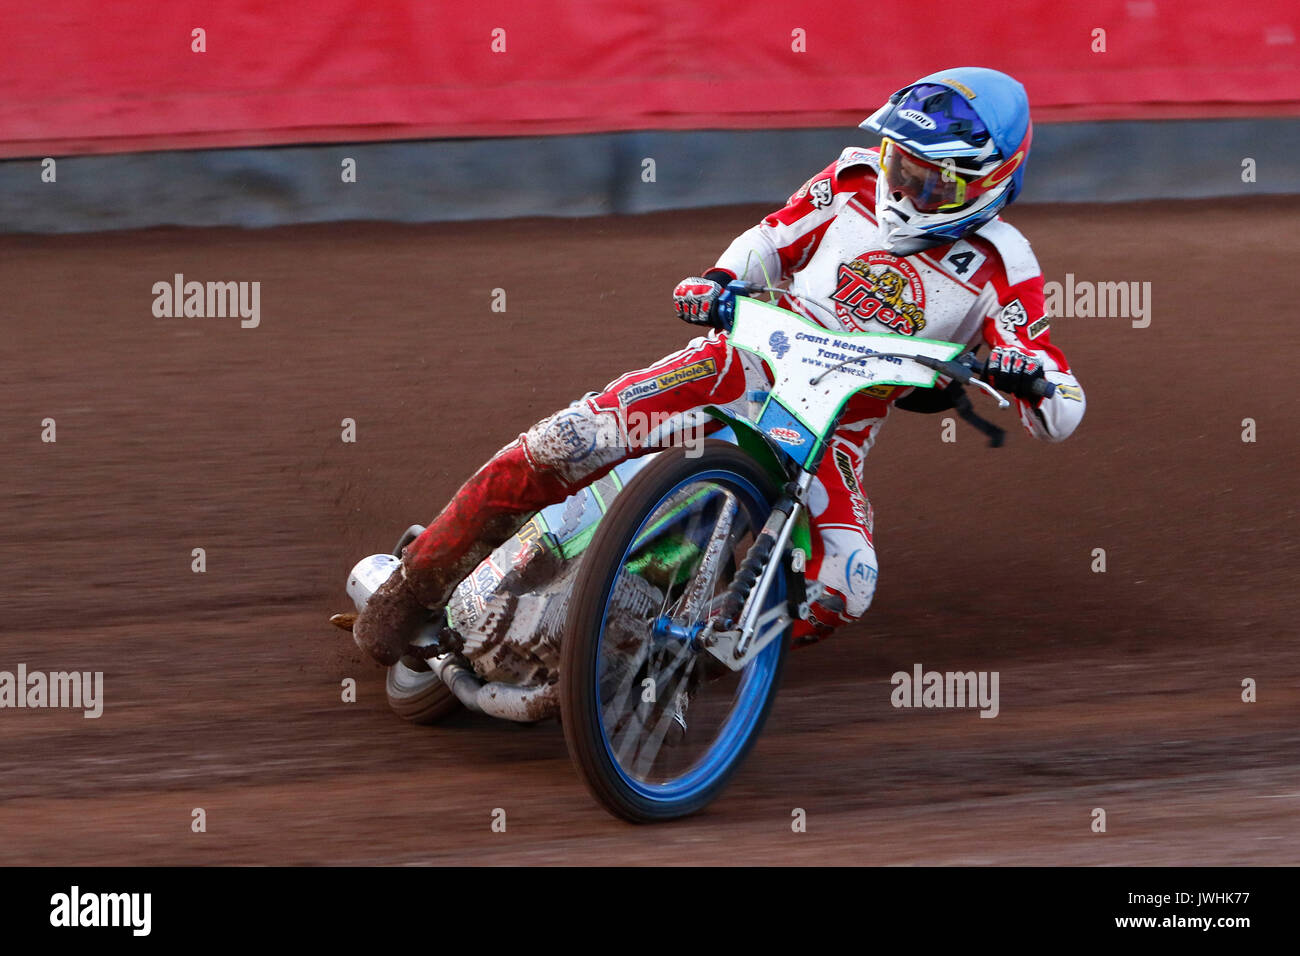 Glasgow, Scotland, UK. 12th August, 2017. Dan Bewley showing he's not to be underestimated at Ashfield Stadium Credit: Colin Poultney/Alamy Live News Stock Photo